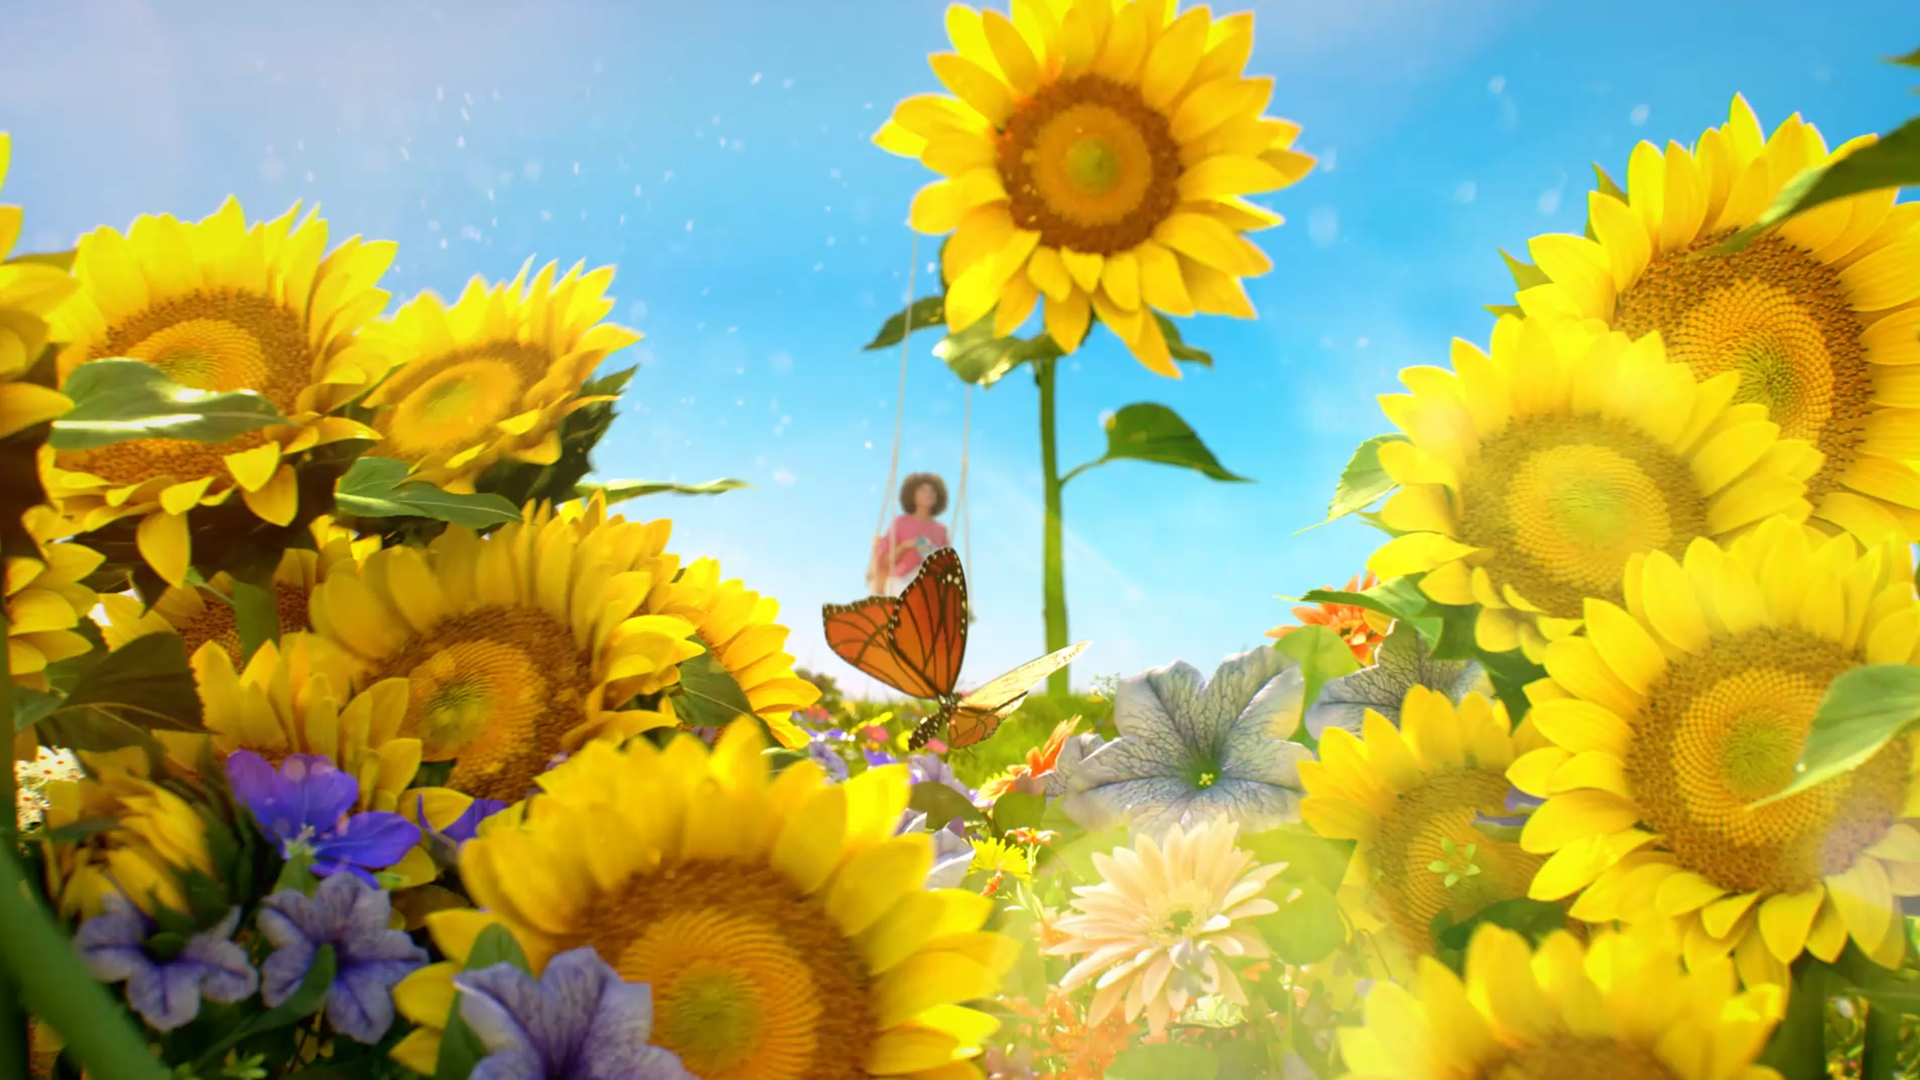 Still from the VANDAL produced Thins Veggie Snaps TVC featuring VFX flowers and butterflies